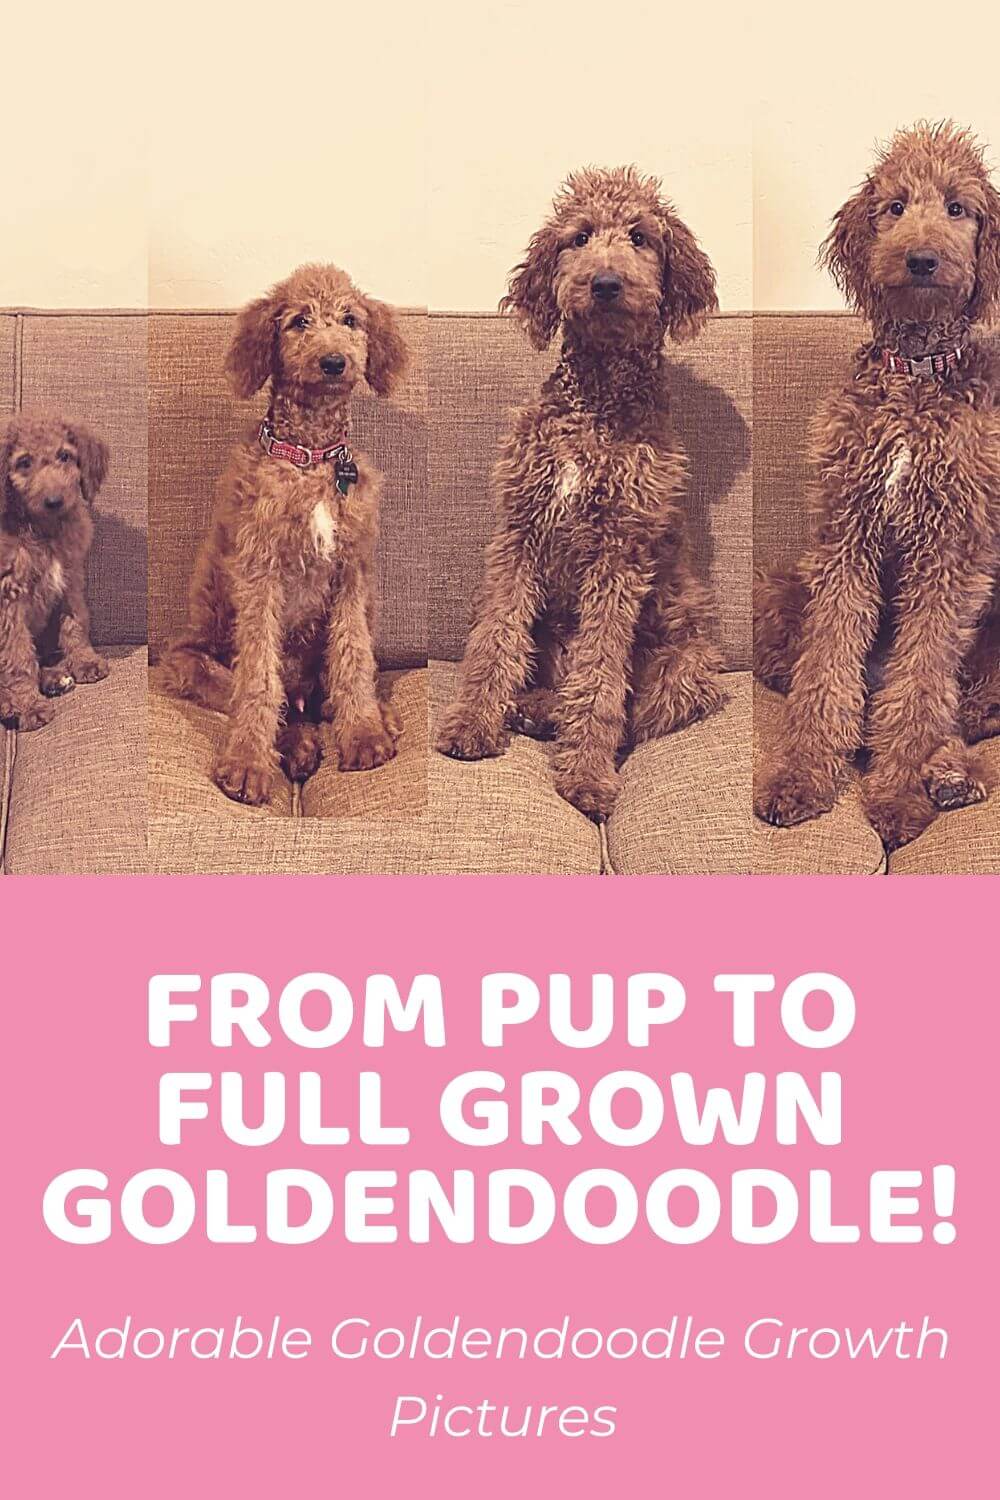 Adorable Goldendoodle Growth Pictures